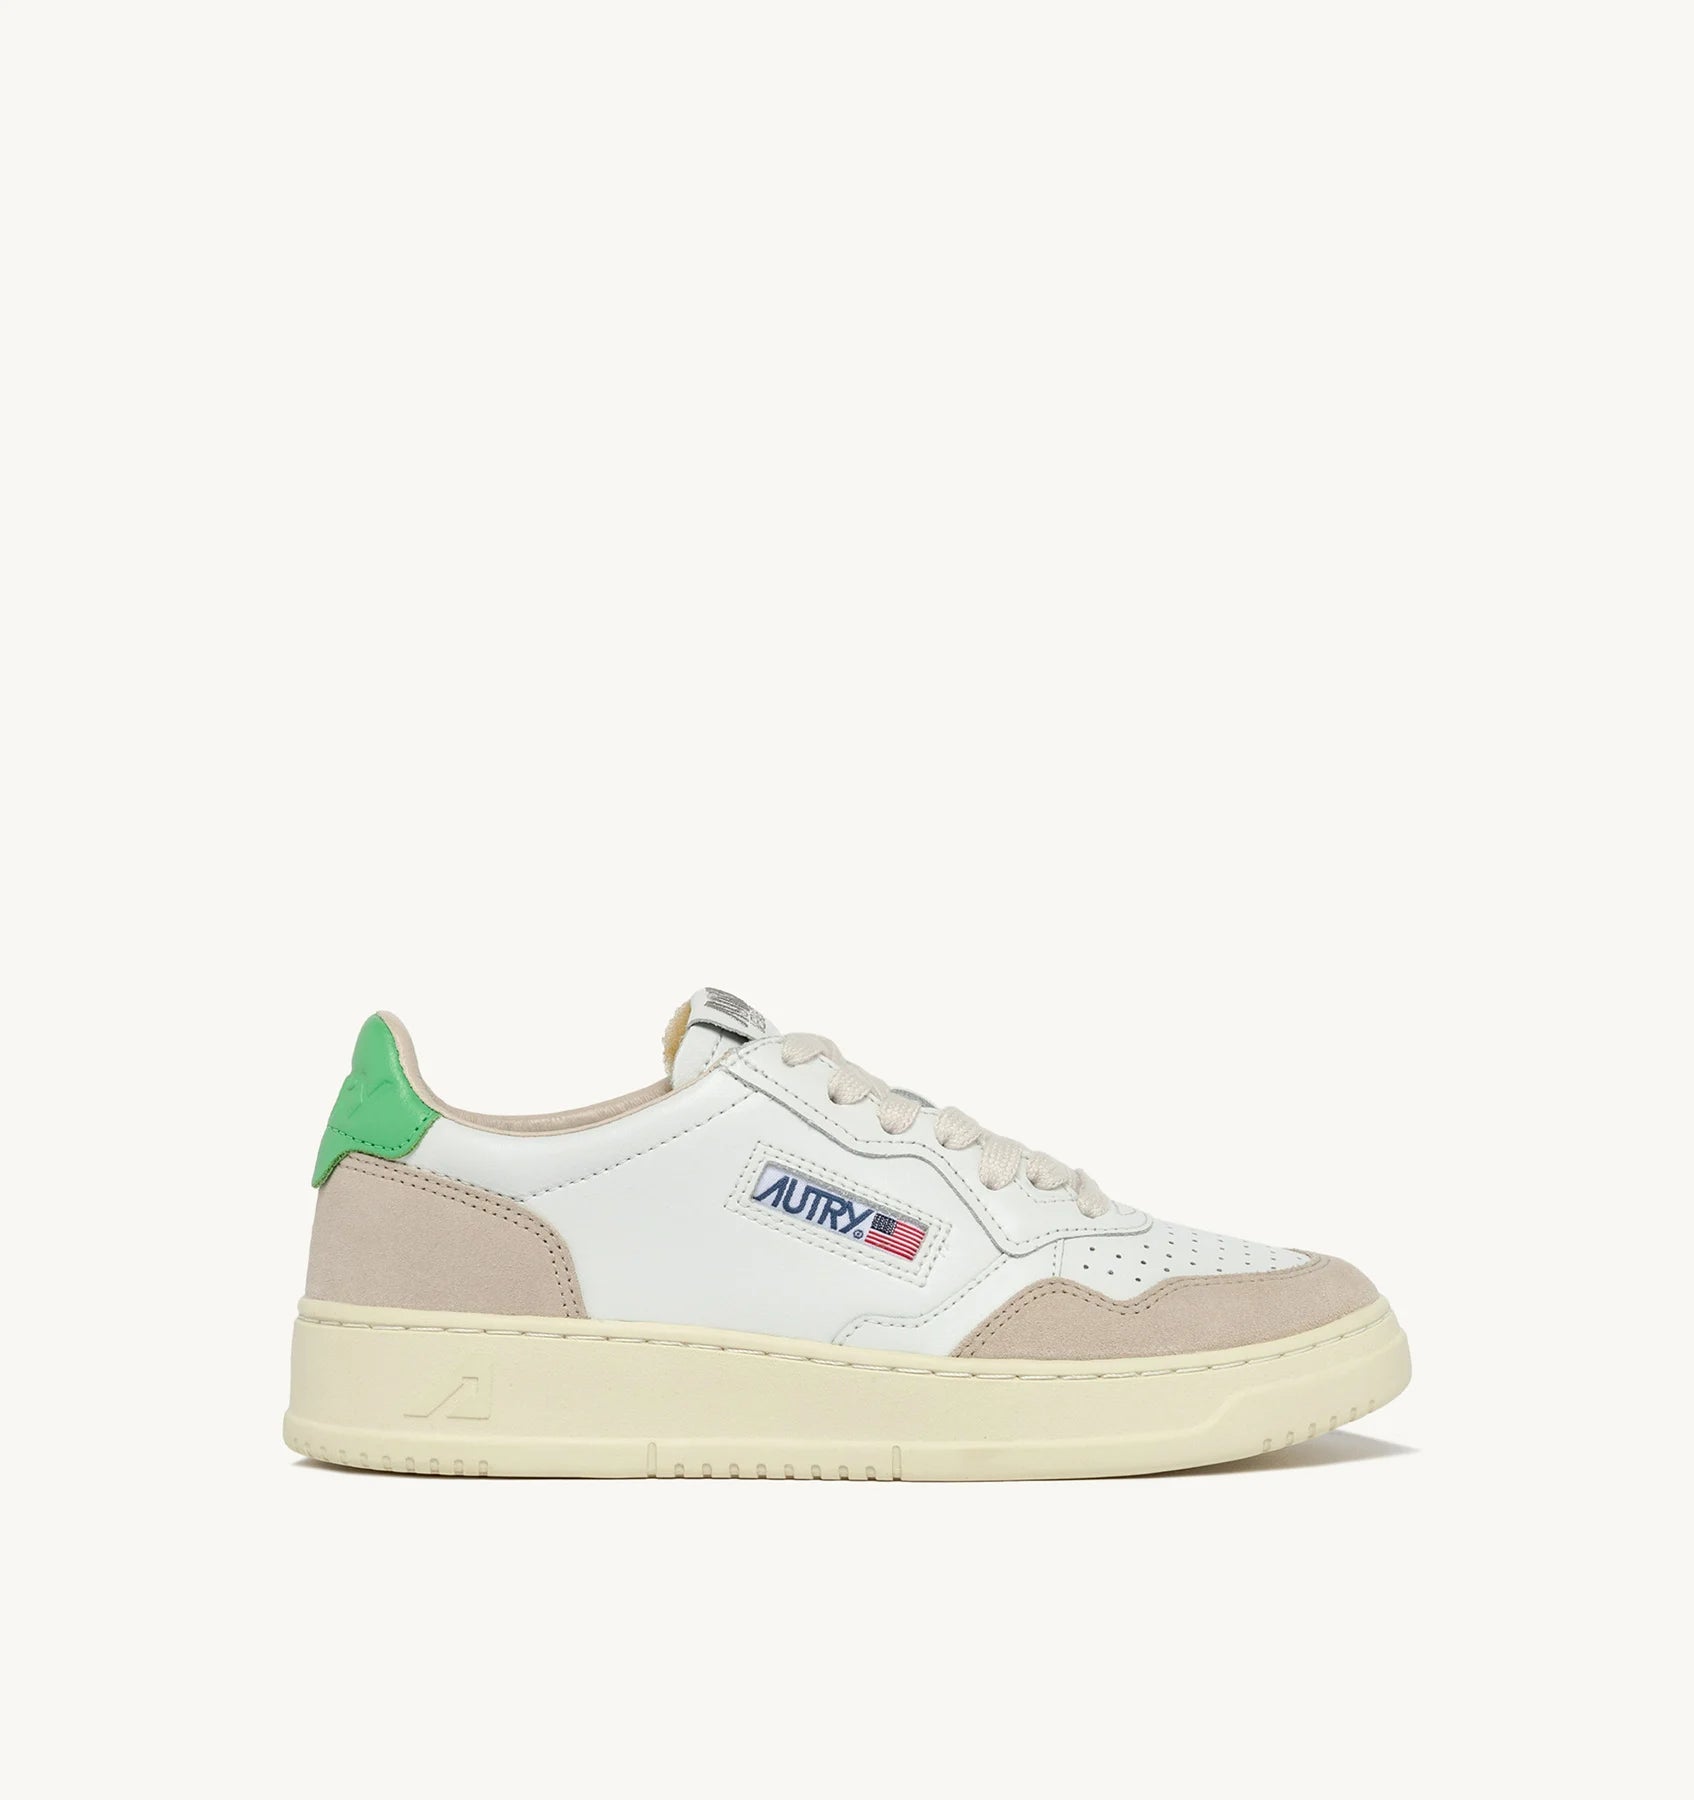 Autry Sneakers Medalist Low White and Green - Den Lille Ida - Autry